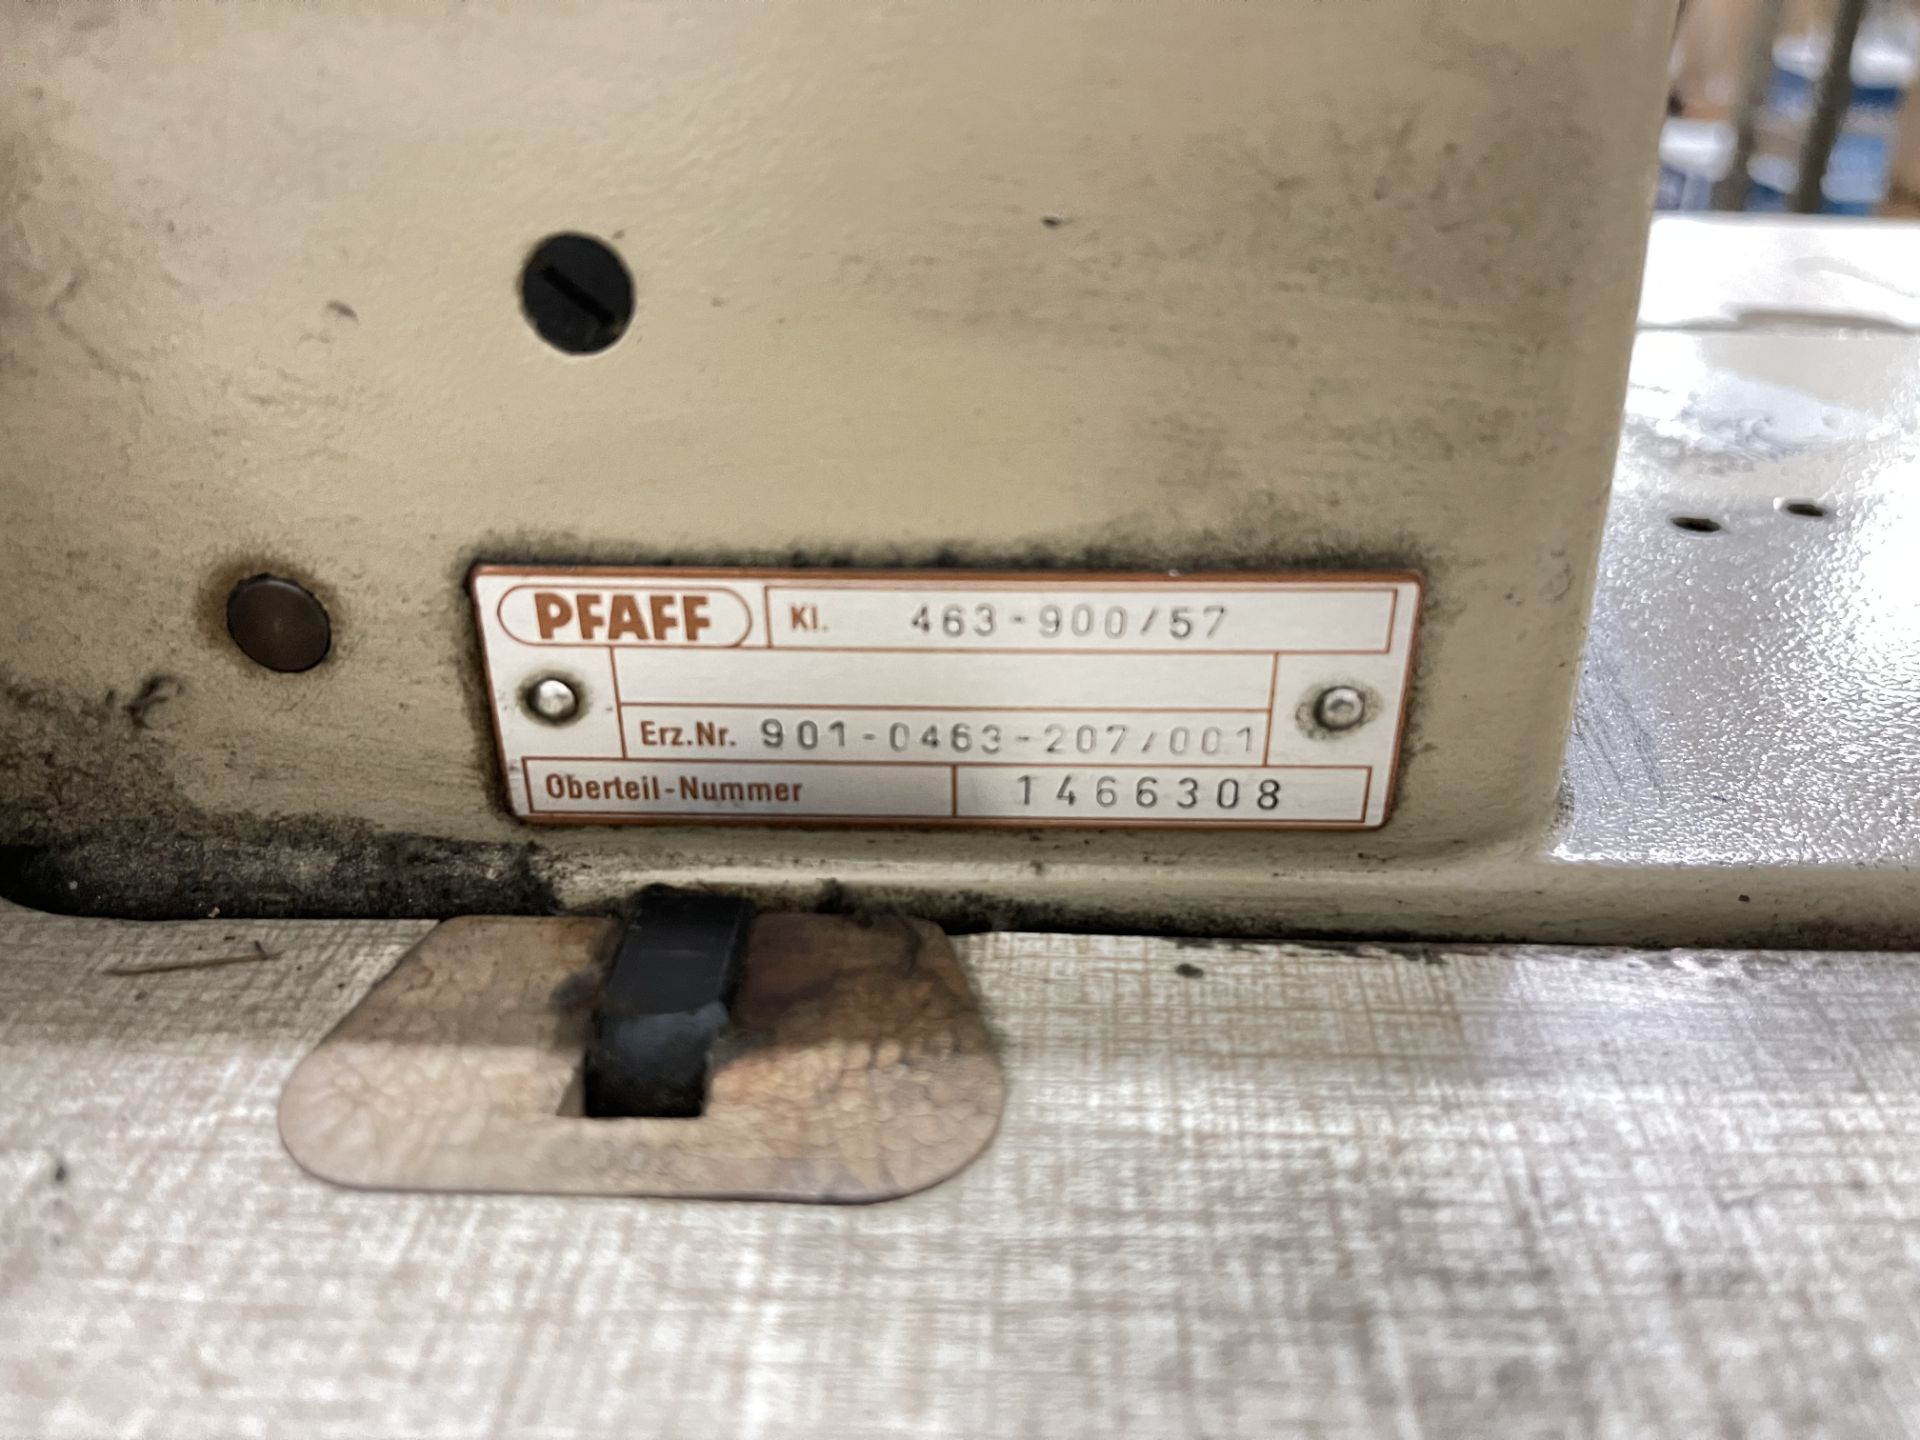 Pfaff 464-900/57 Industrial Sewing machine. S/No 1466308 - Image 8 of 8